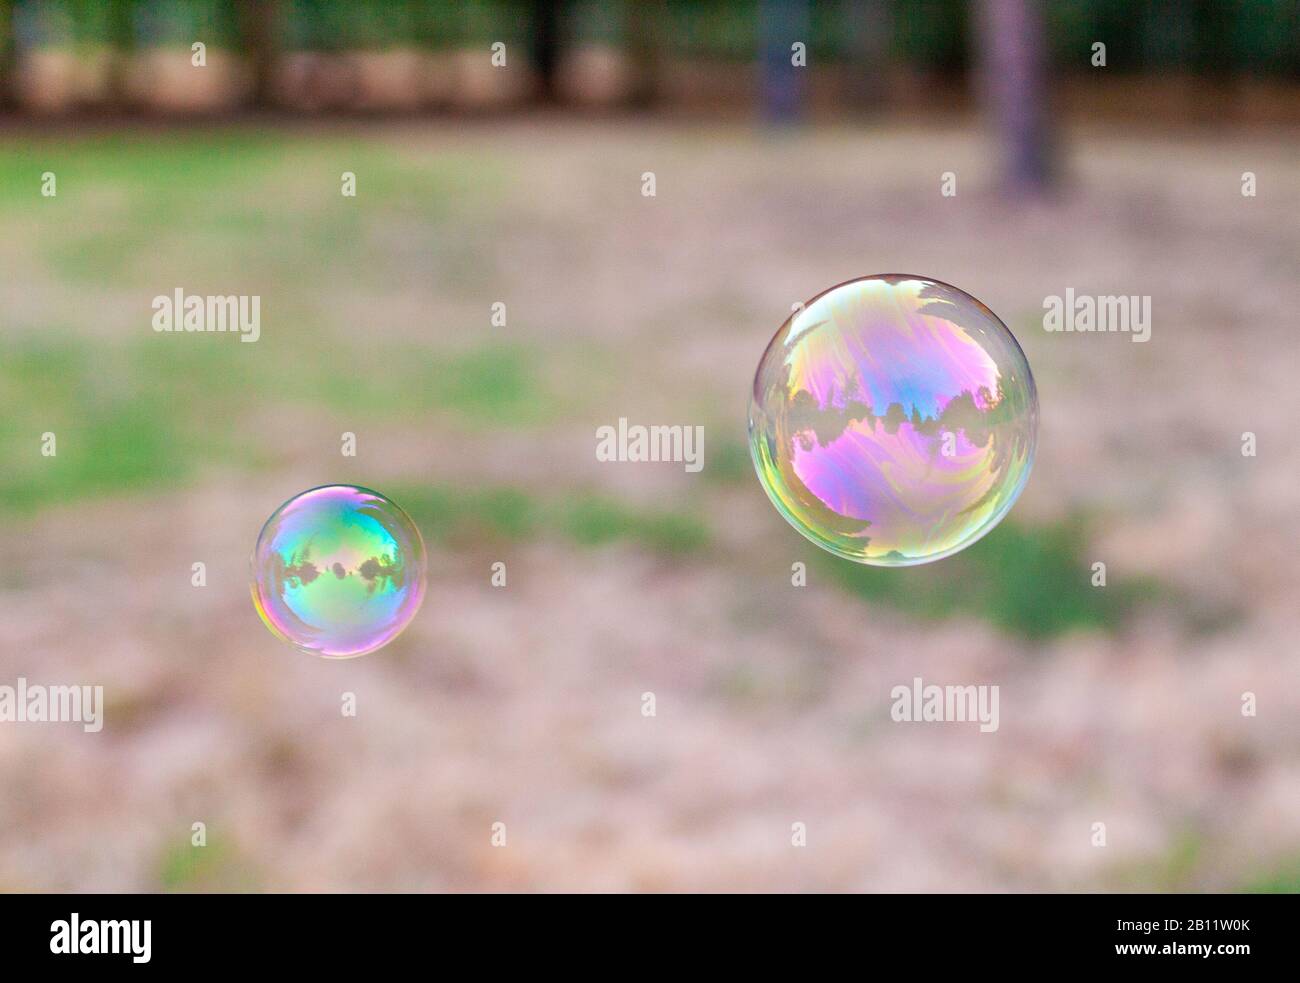 Colorful soap bubbles with reflections Stock Photo